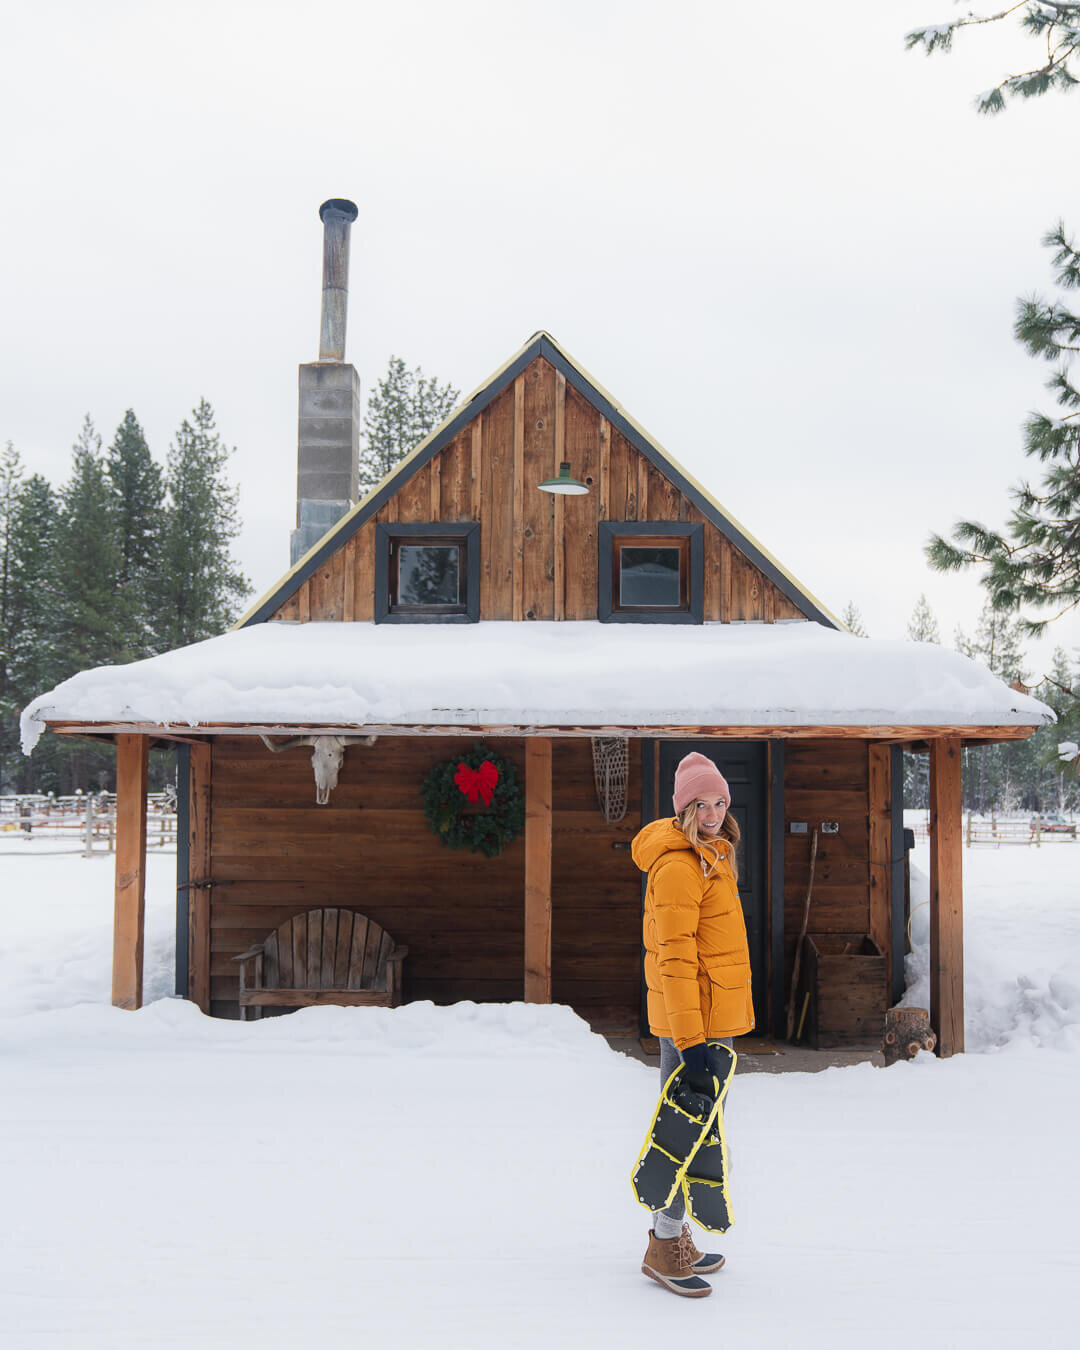 Getting ready for some cabin time after snowshoeing near Winthrop, Washington. Wearing:  Jacket ,  Beanie ,  Leggings ,  Boots .